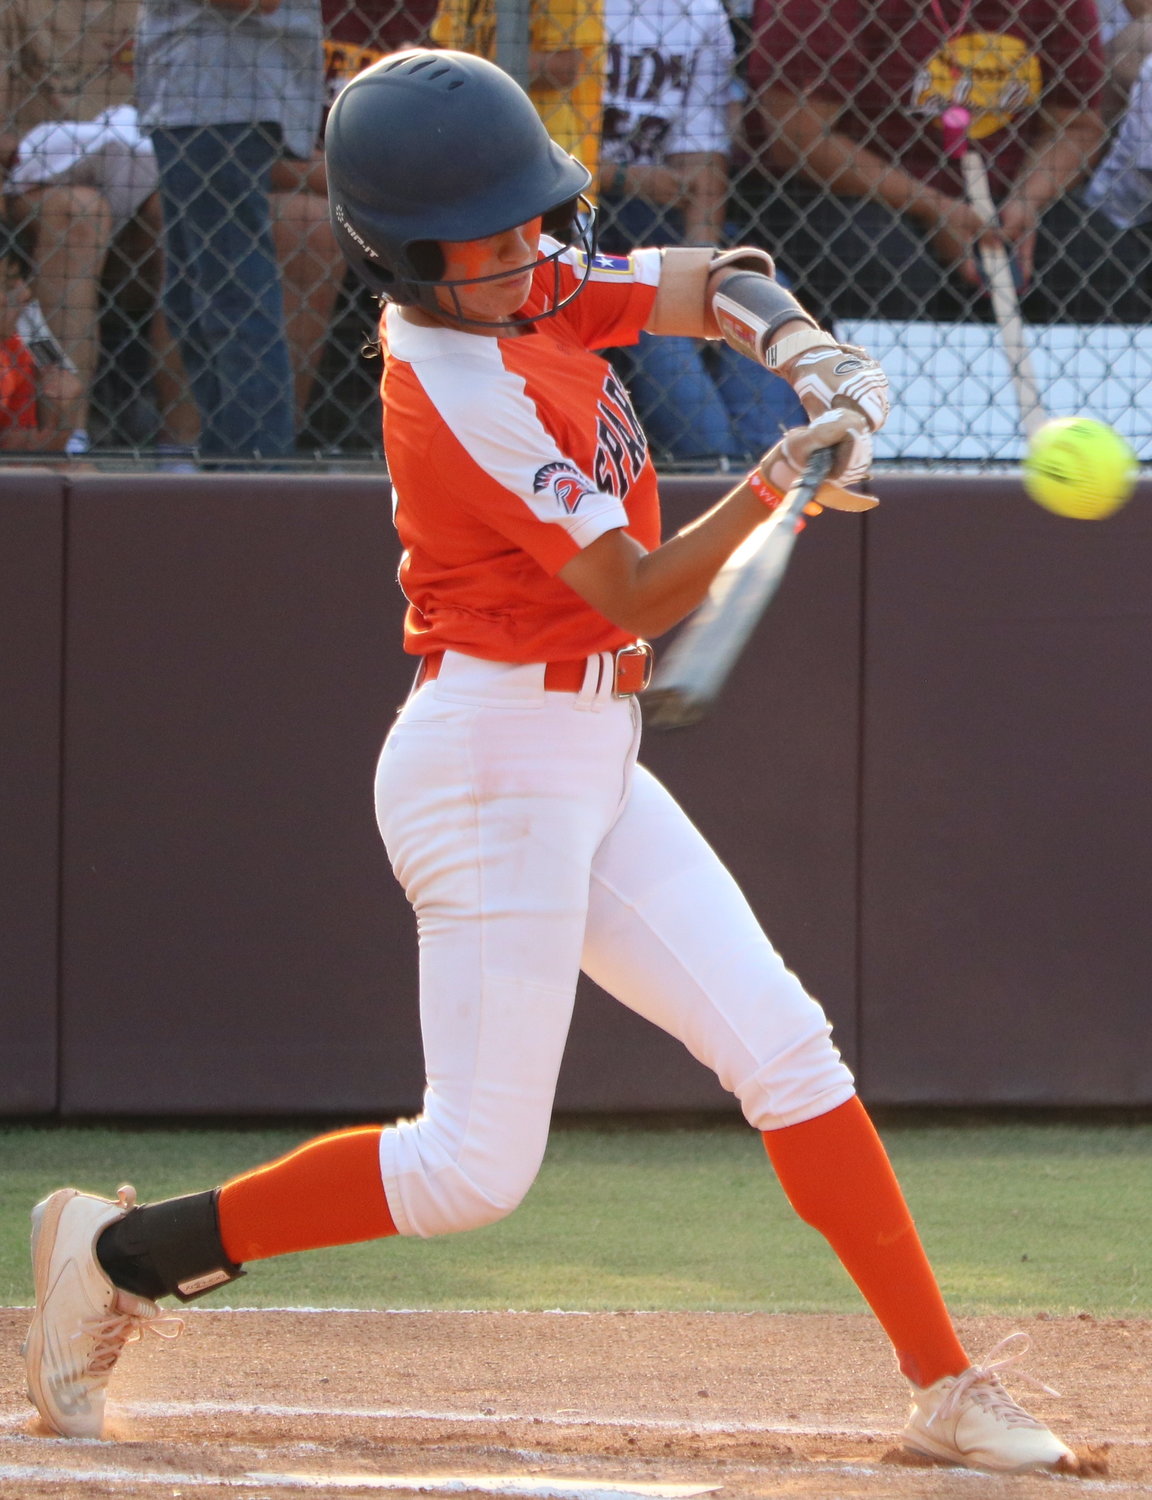 Mackinzie Stutts hits during Friday’s Class 6A Regional Semifinal between Seven Lakes and Deer Park at the Summer Creek softball field.